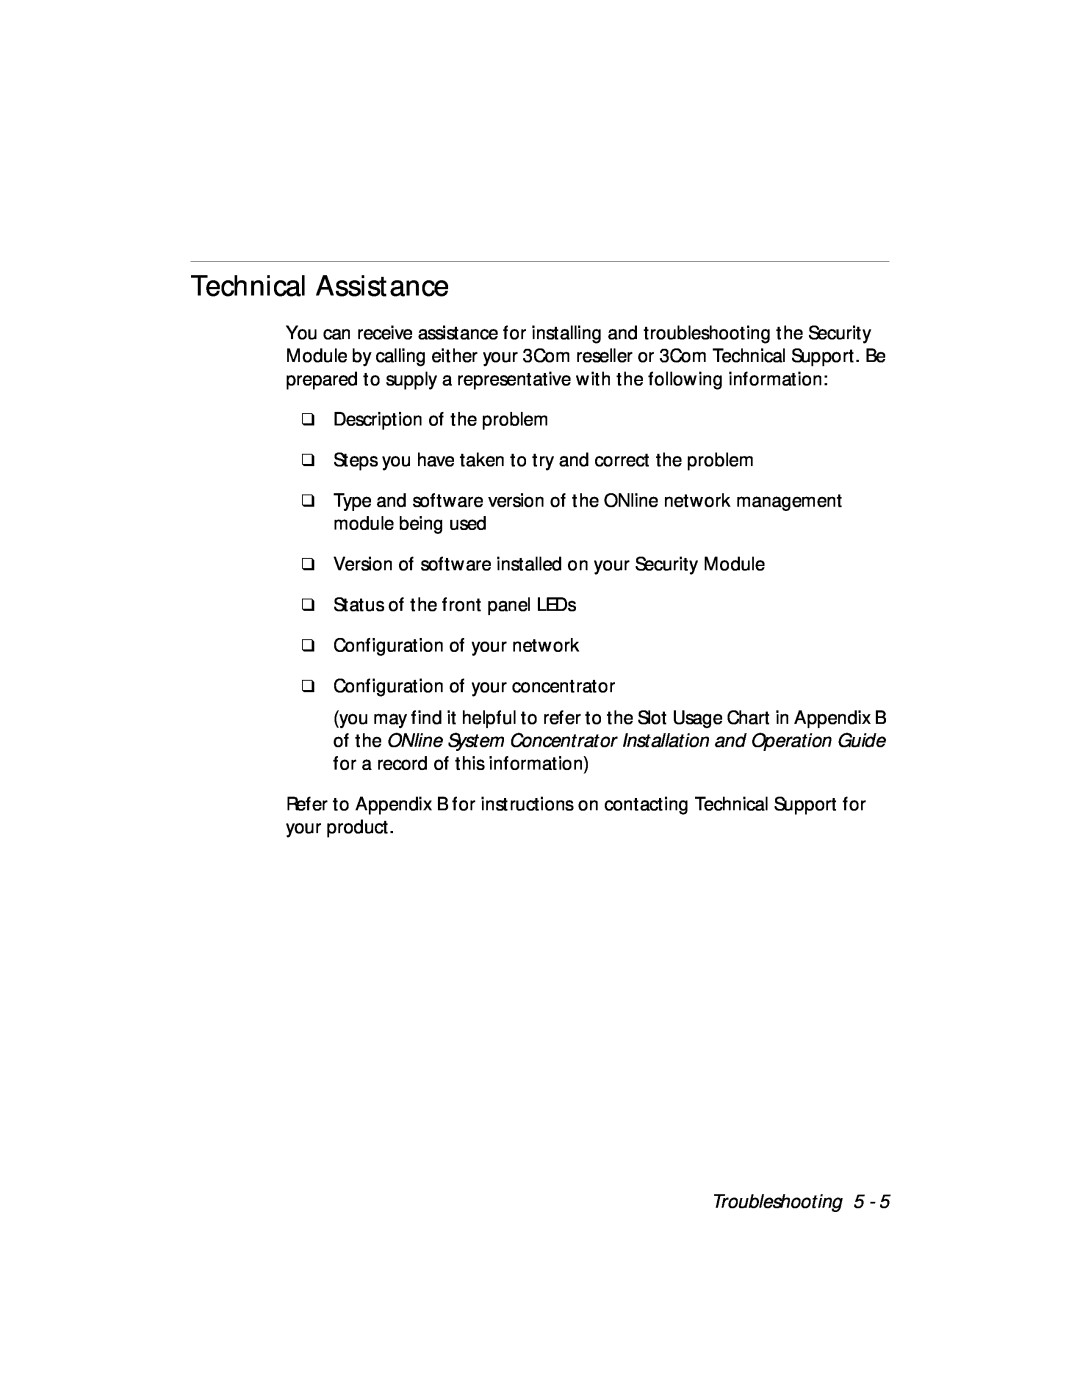 3Com 5112M-TPLS installation and operation guide Technical Assistance, Troubleshooting 5 